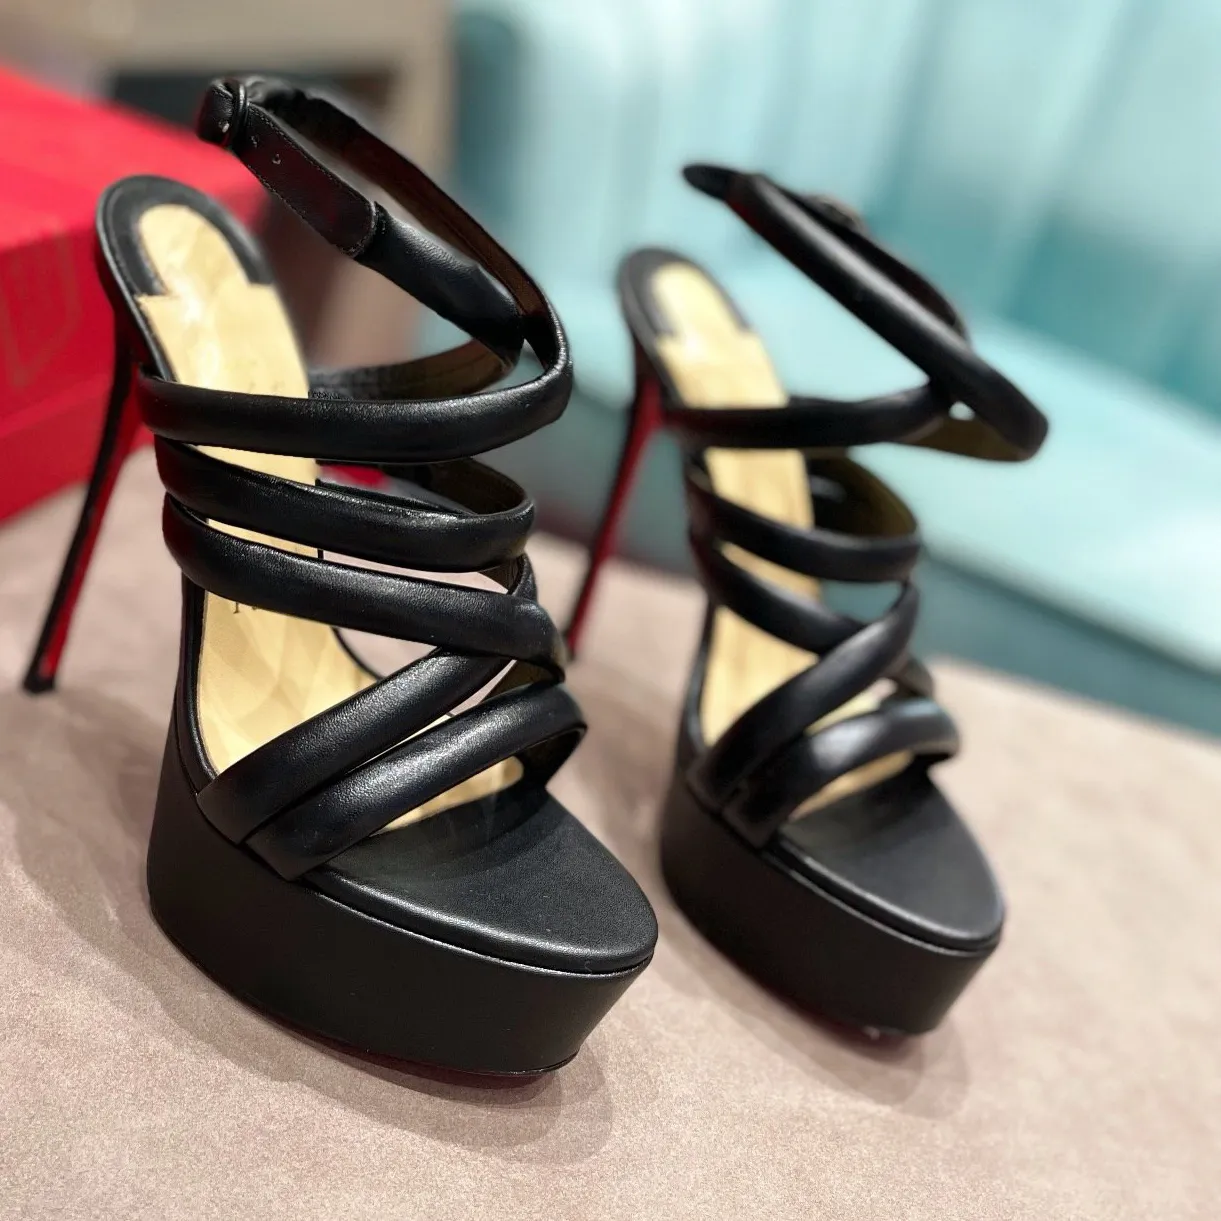 Fashion designer High quality womens red heel High heels Luxury leather soled sandals fine heels inlaid rhindiamond AAA Sky-high heels 15cm Dinner party shoes H0654